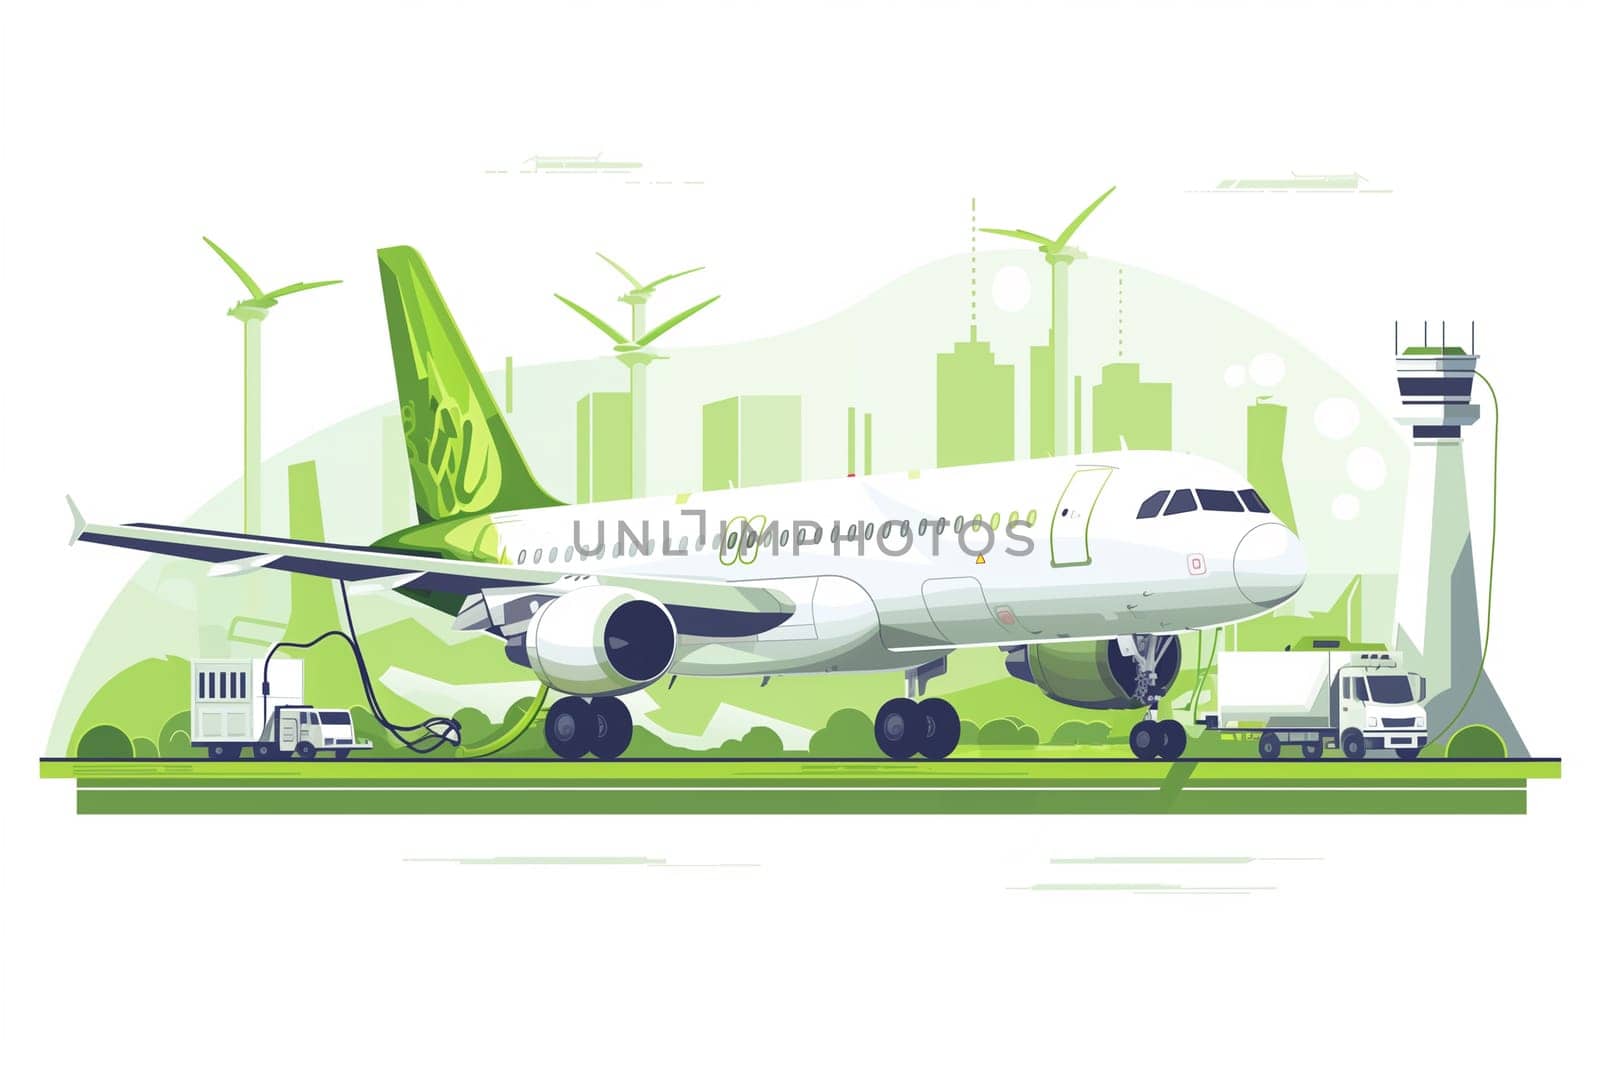 Green Energy Concept With Airplane at Eco-Friendly Airport During Daytime by Sd28DimoN_1976